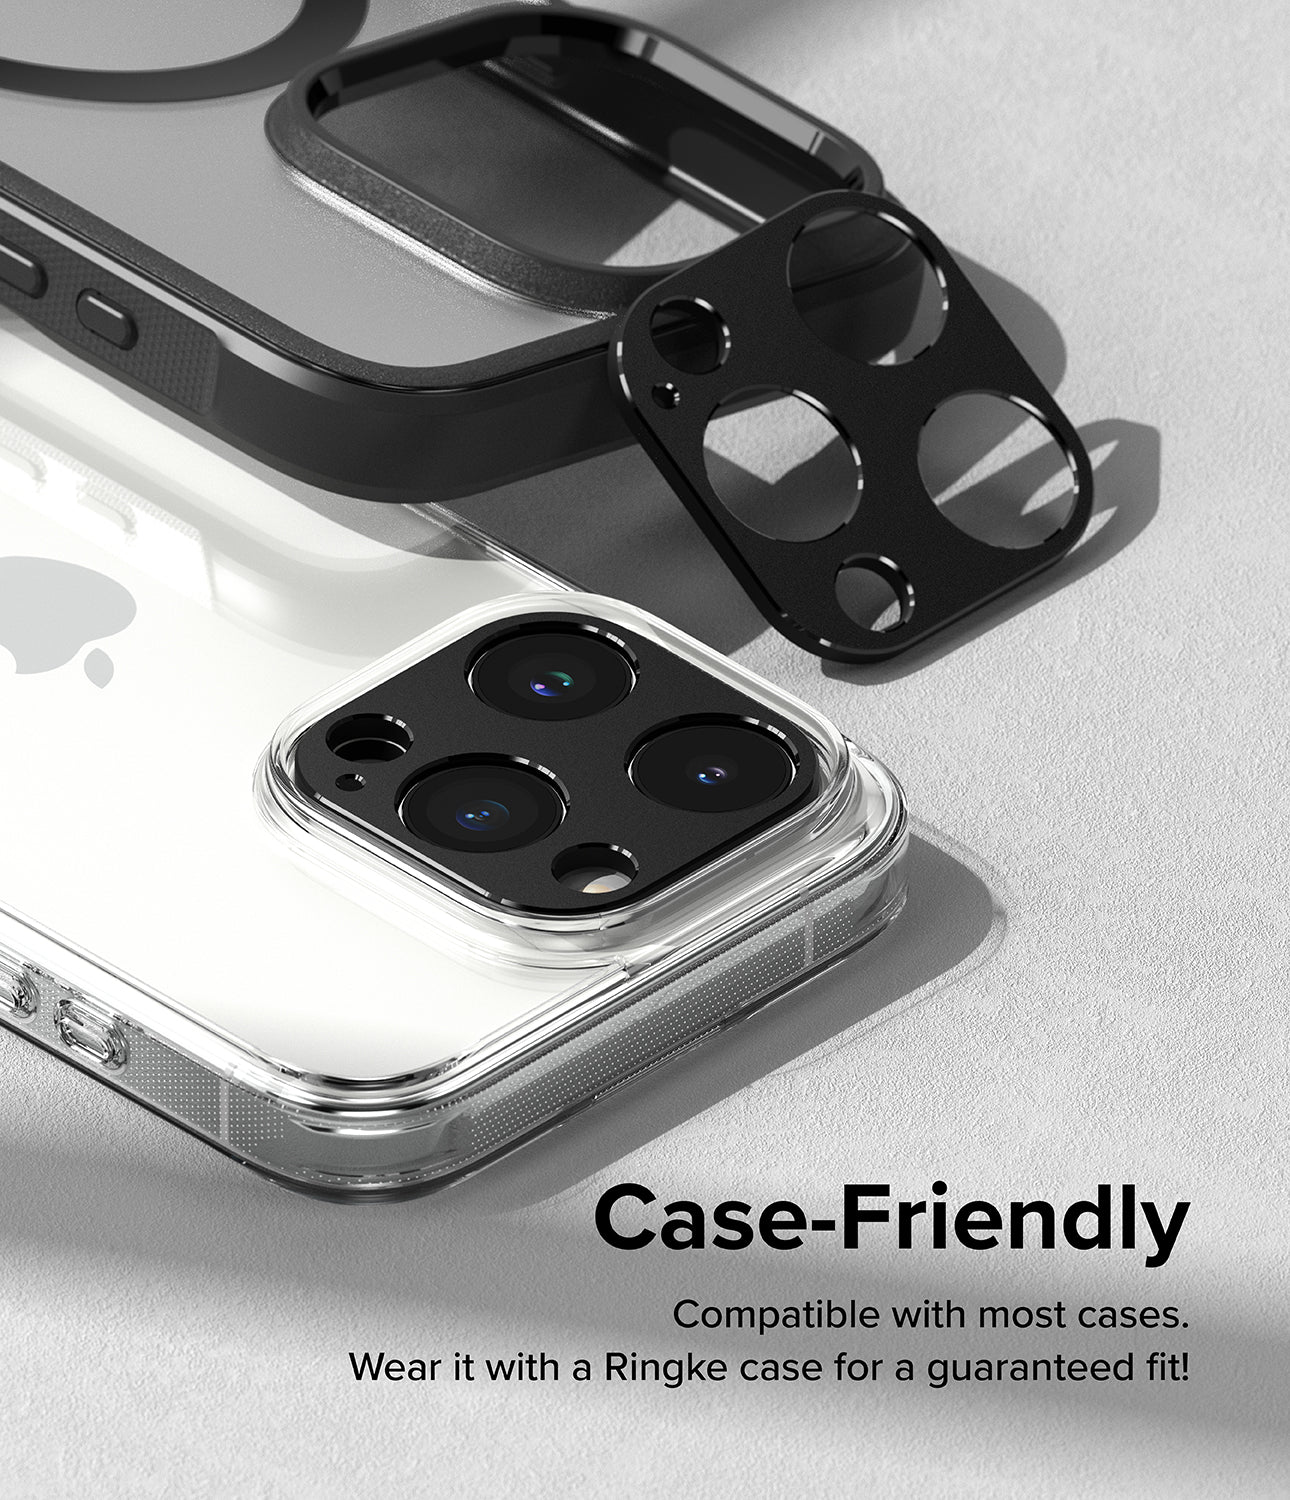 iPhone 15 Pro Max / iPhone 15 Prp | Camera Styling - Black aluminum metallic coveriPhone 15 Pro Max / iPhone 15 Prp | Camera Styling - Black aluminum metallic cover